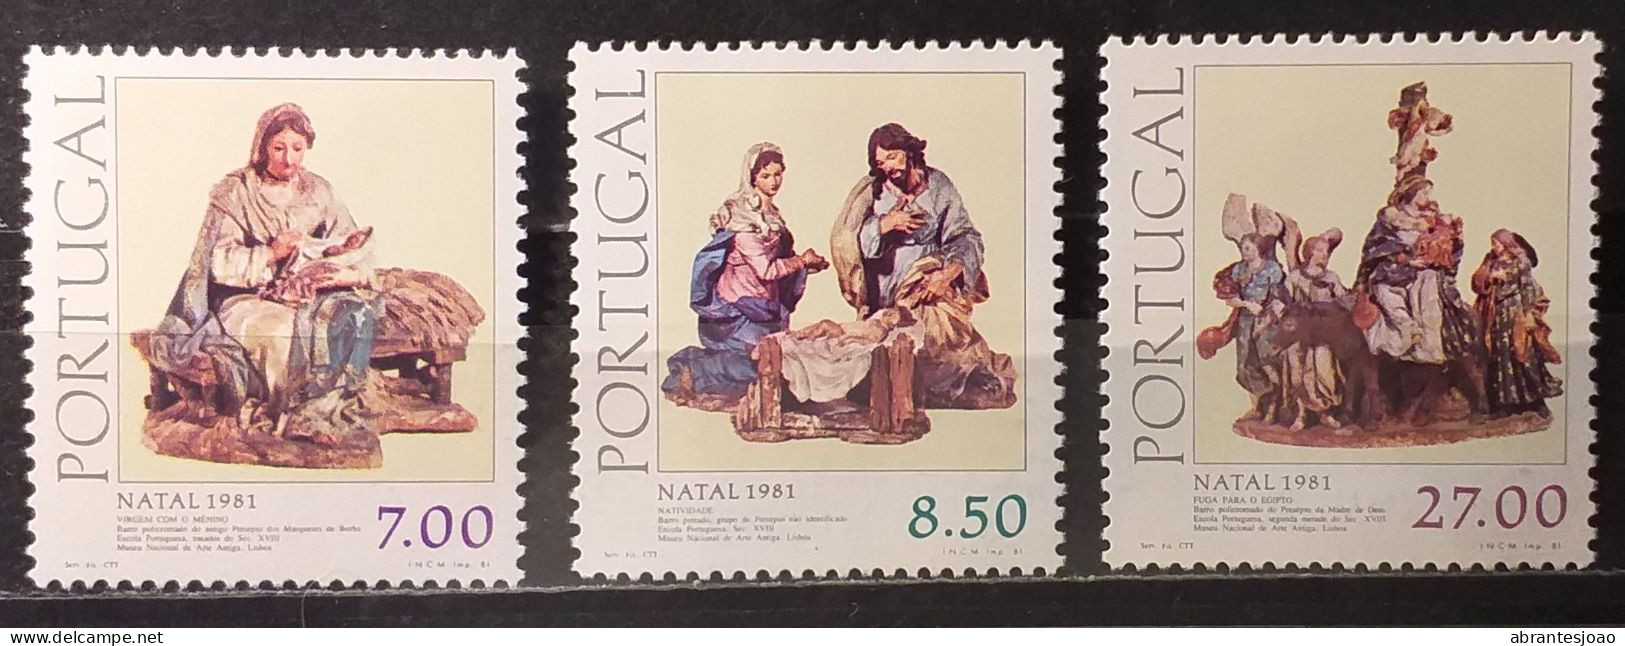 1981 - Portugal - MNH - 5th. Centenary Of Access Of King John II To The Throne + Christmas - 5 Stamps - Ongebruikt